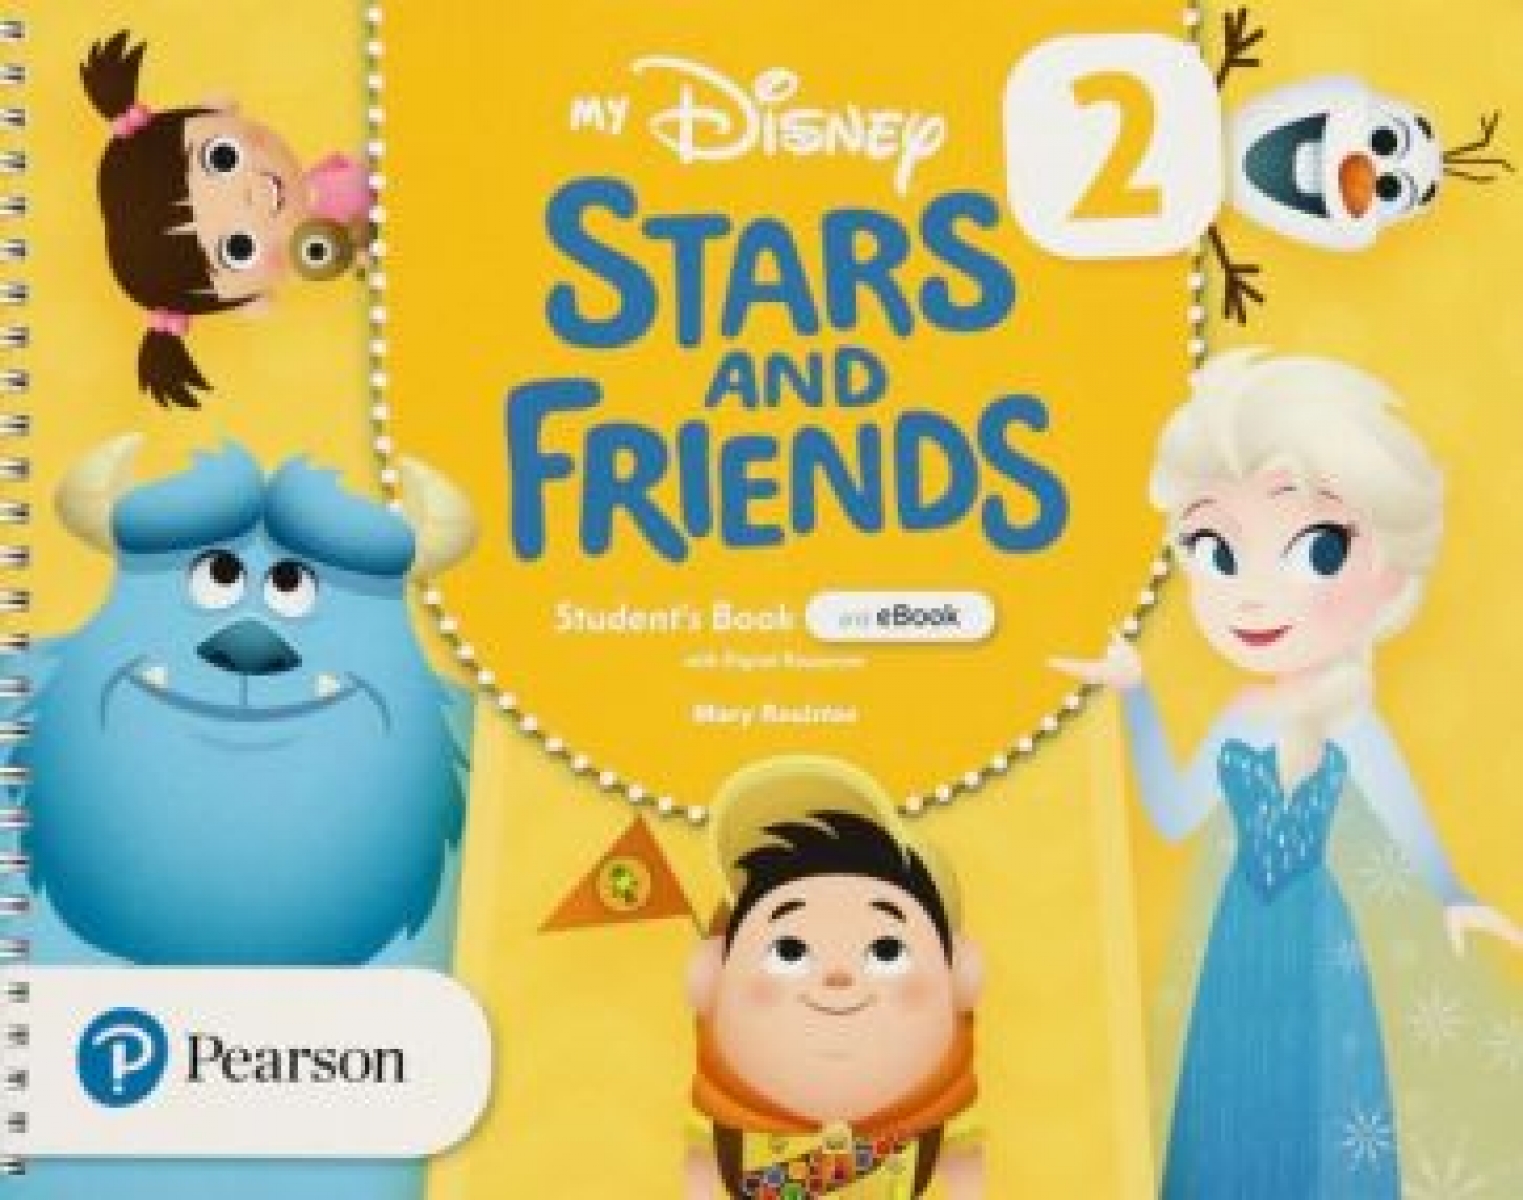 Roulston Mary My Disney Stars and Friends. Level 2. Student's Book with eBook and Digital Resources 